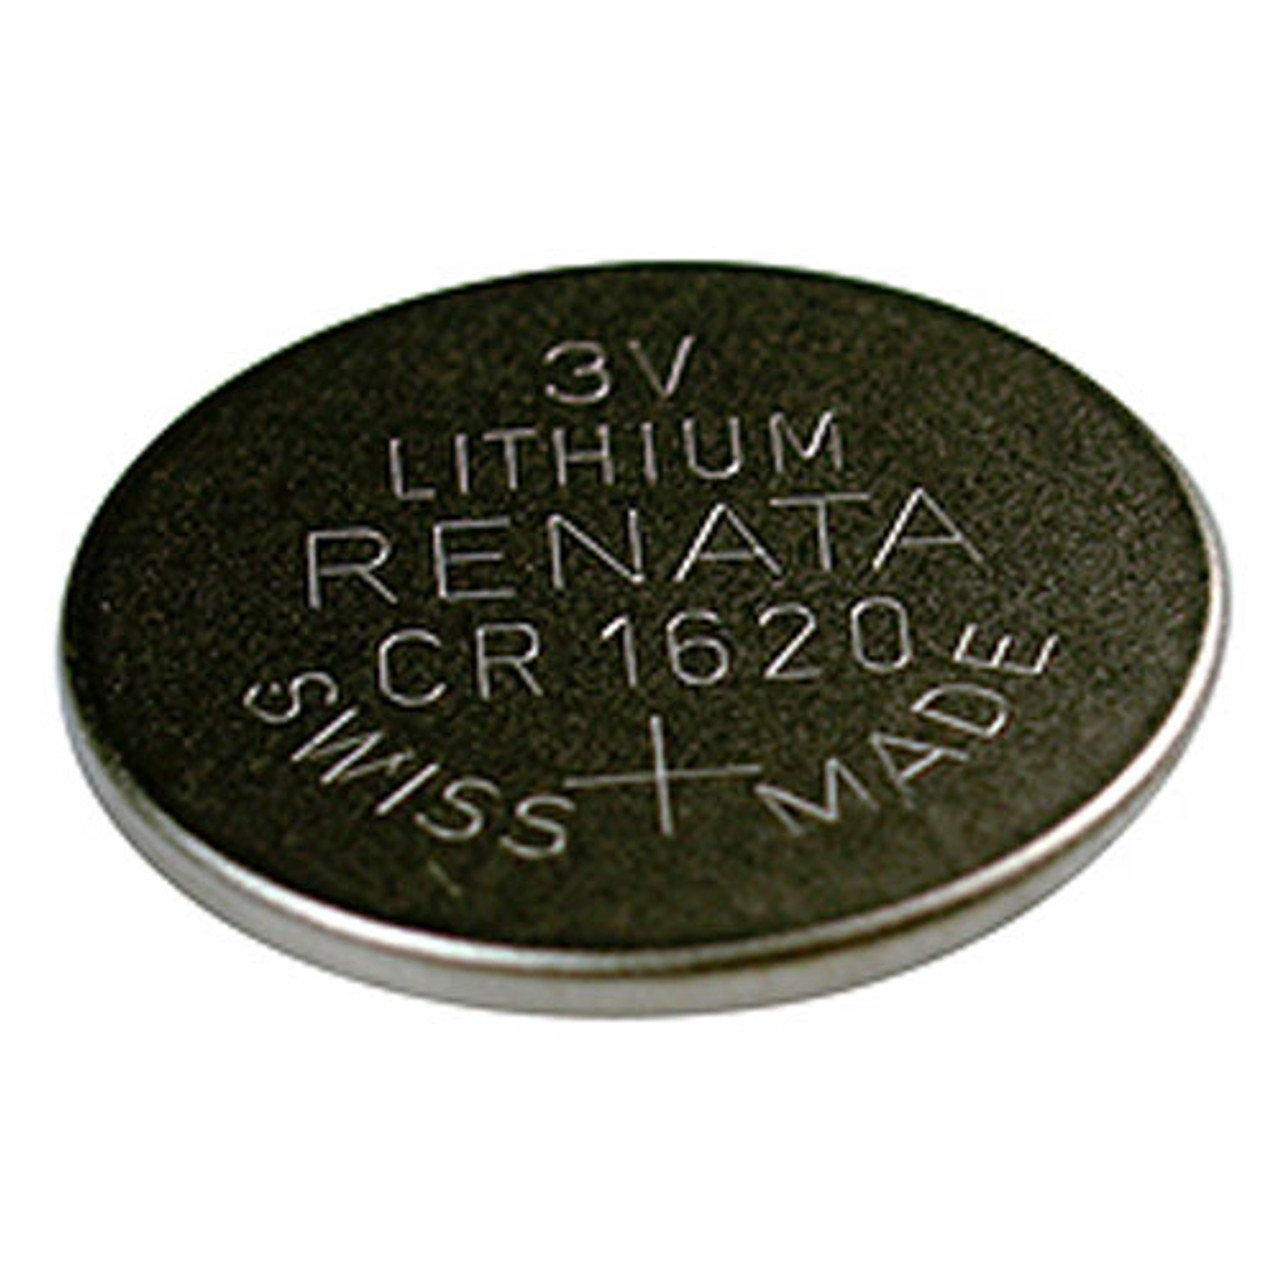 CR1620 ZEUS Battery Products, Battery Products